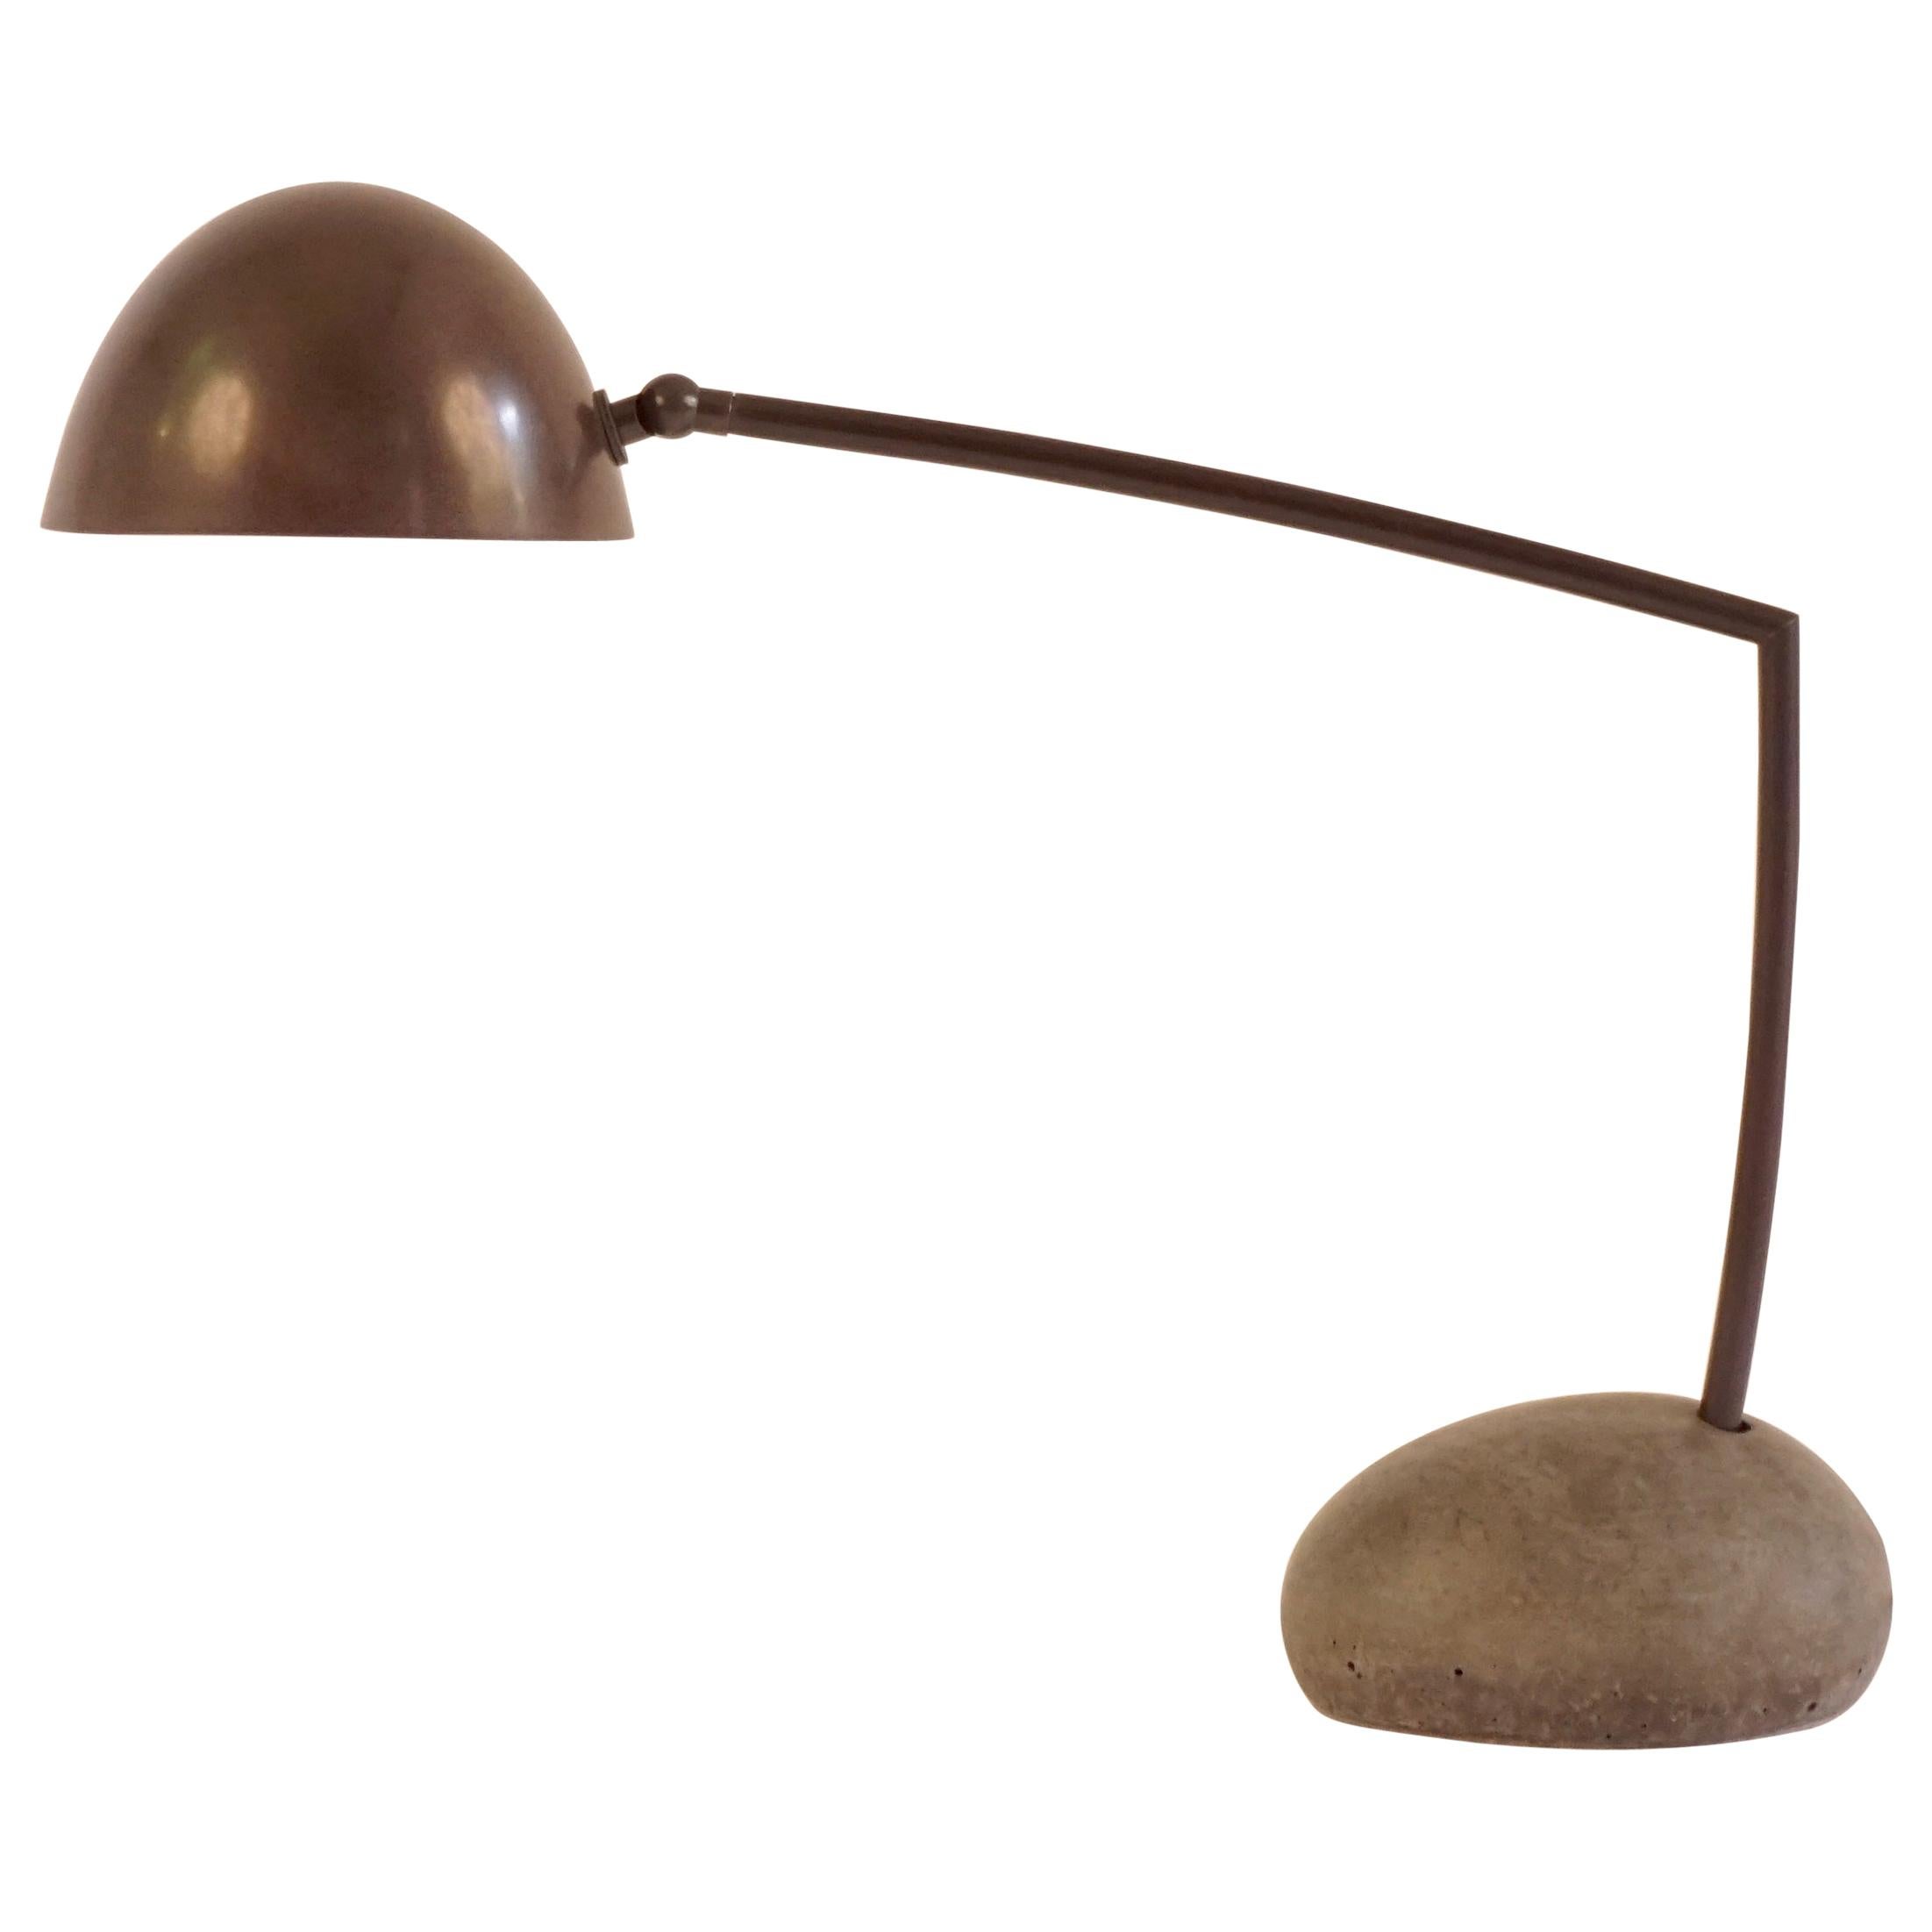 Skye Desk Lamp Small, with Spun Bronze Shade and Stone Shaped Cement Base